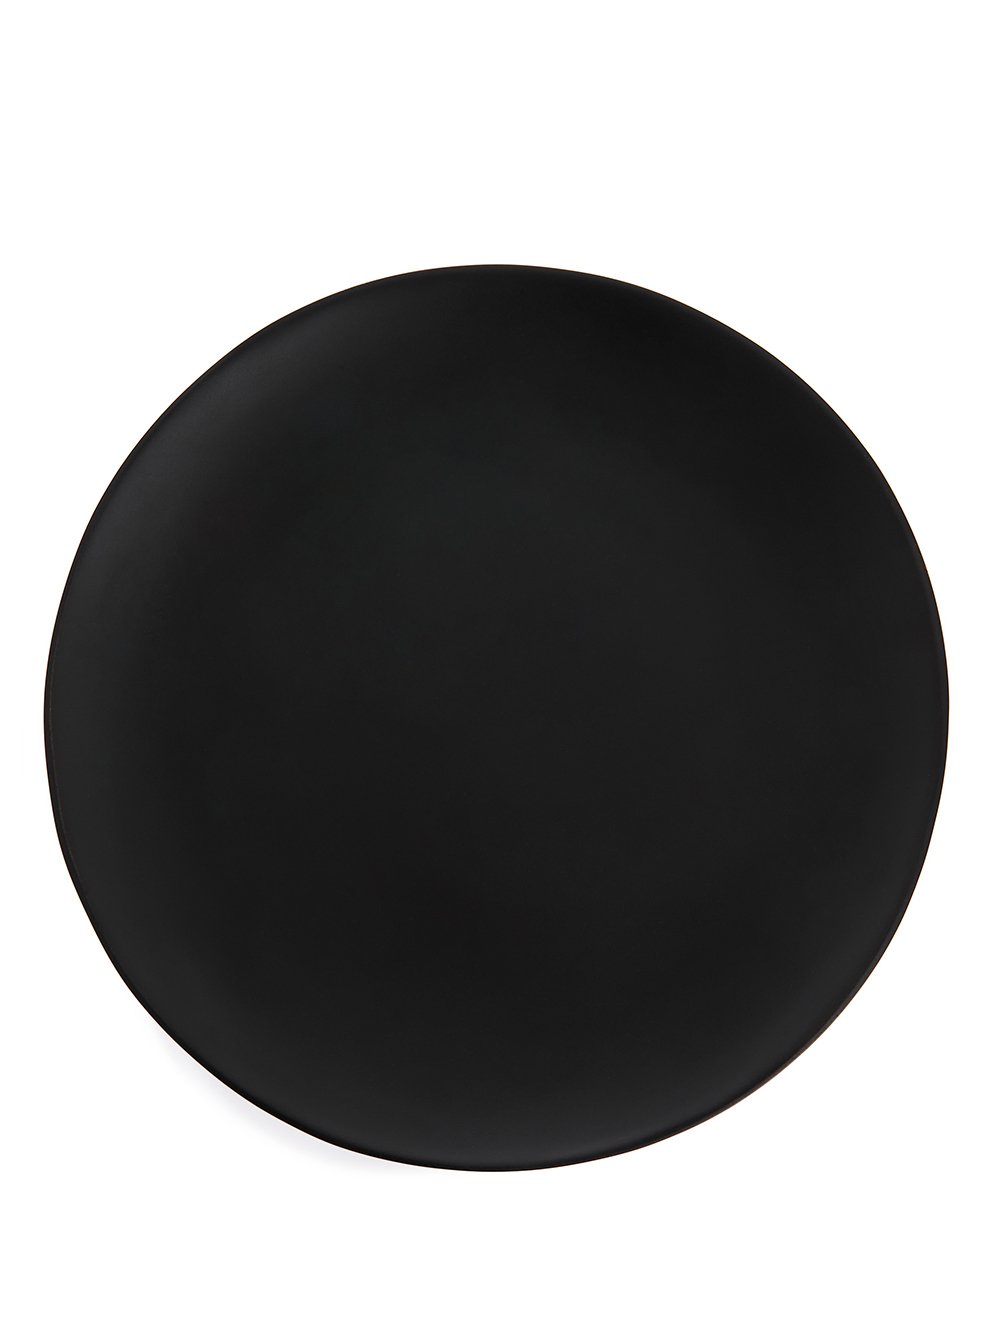 RICK OWENS BRAZIER IN BLACK BRONZE IS A ROUND SHAPED THREE LEGGED TABLE WITH POLISHED SURFACE.